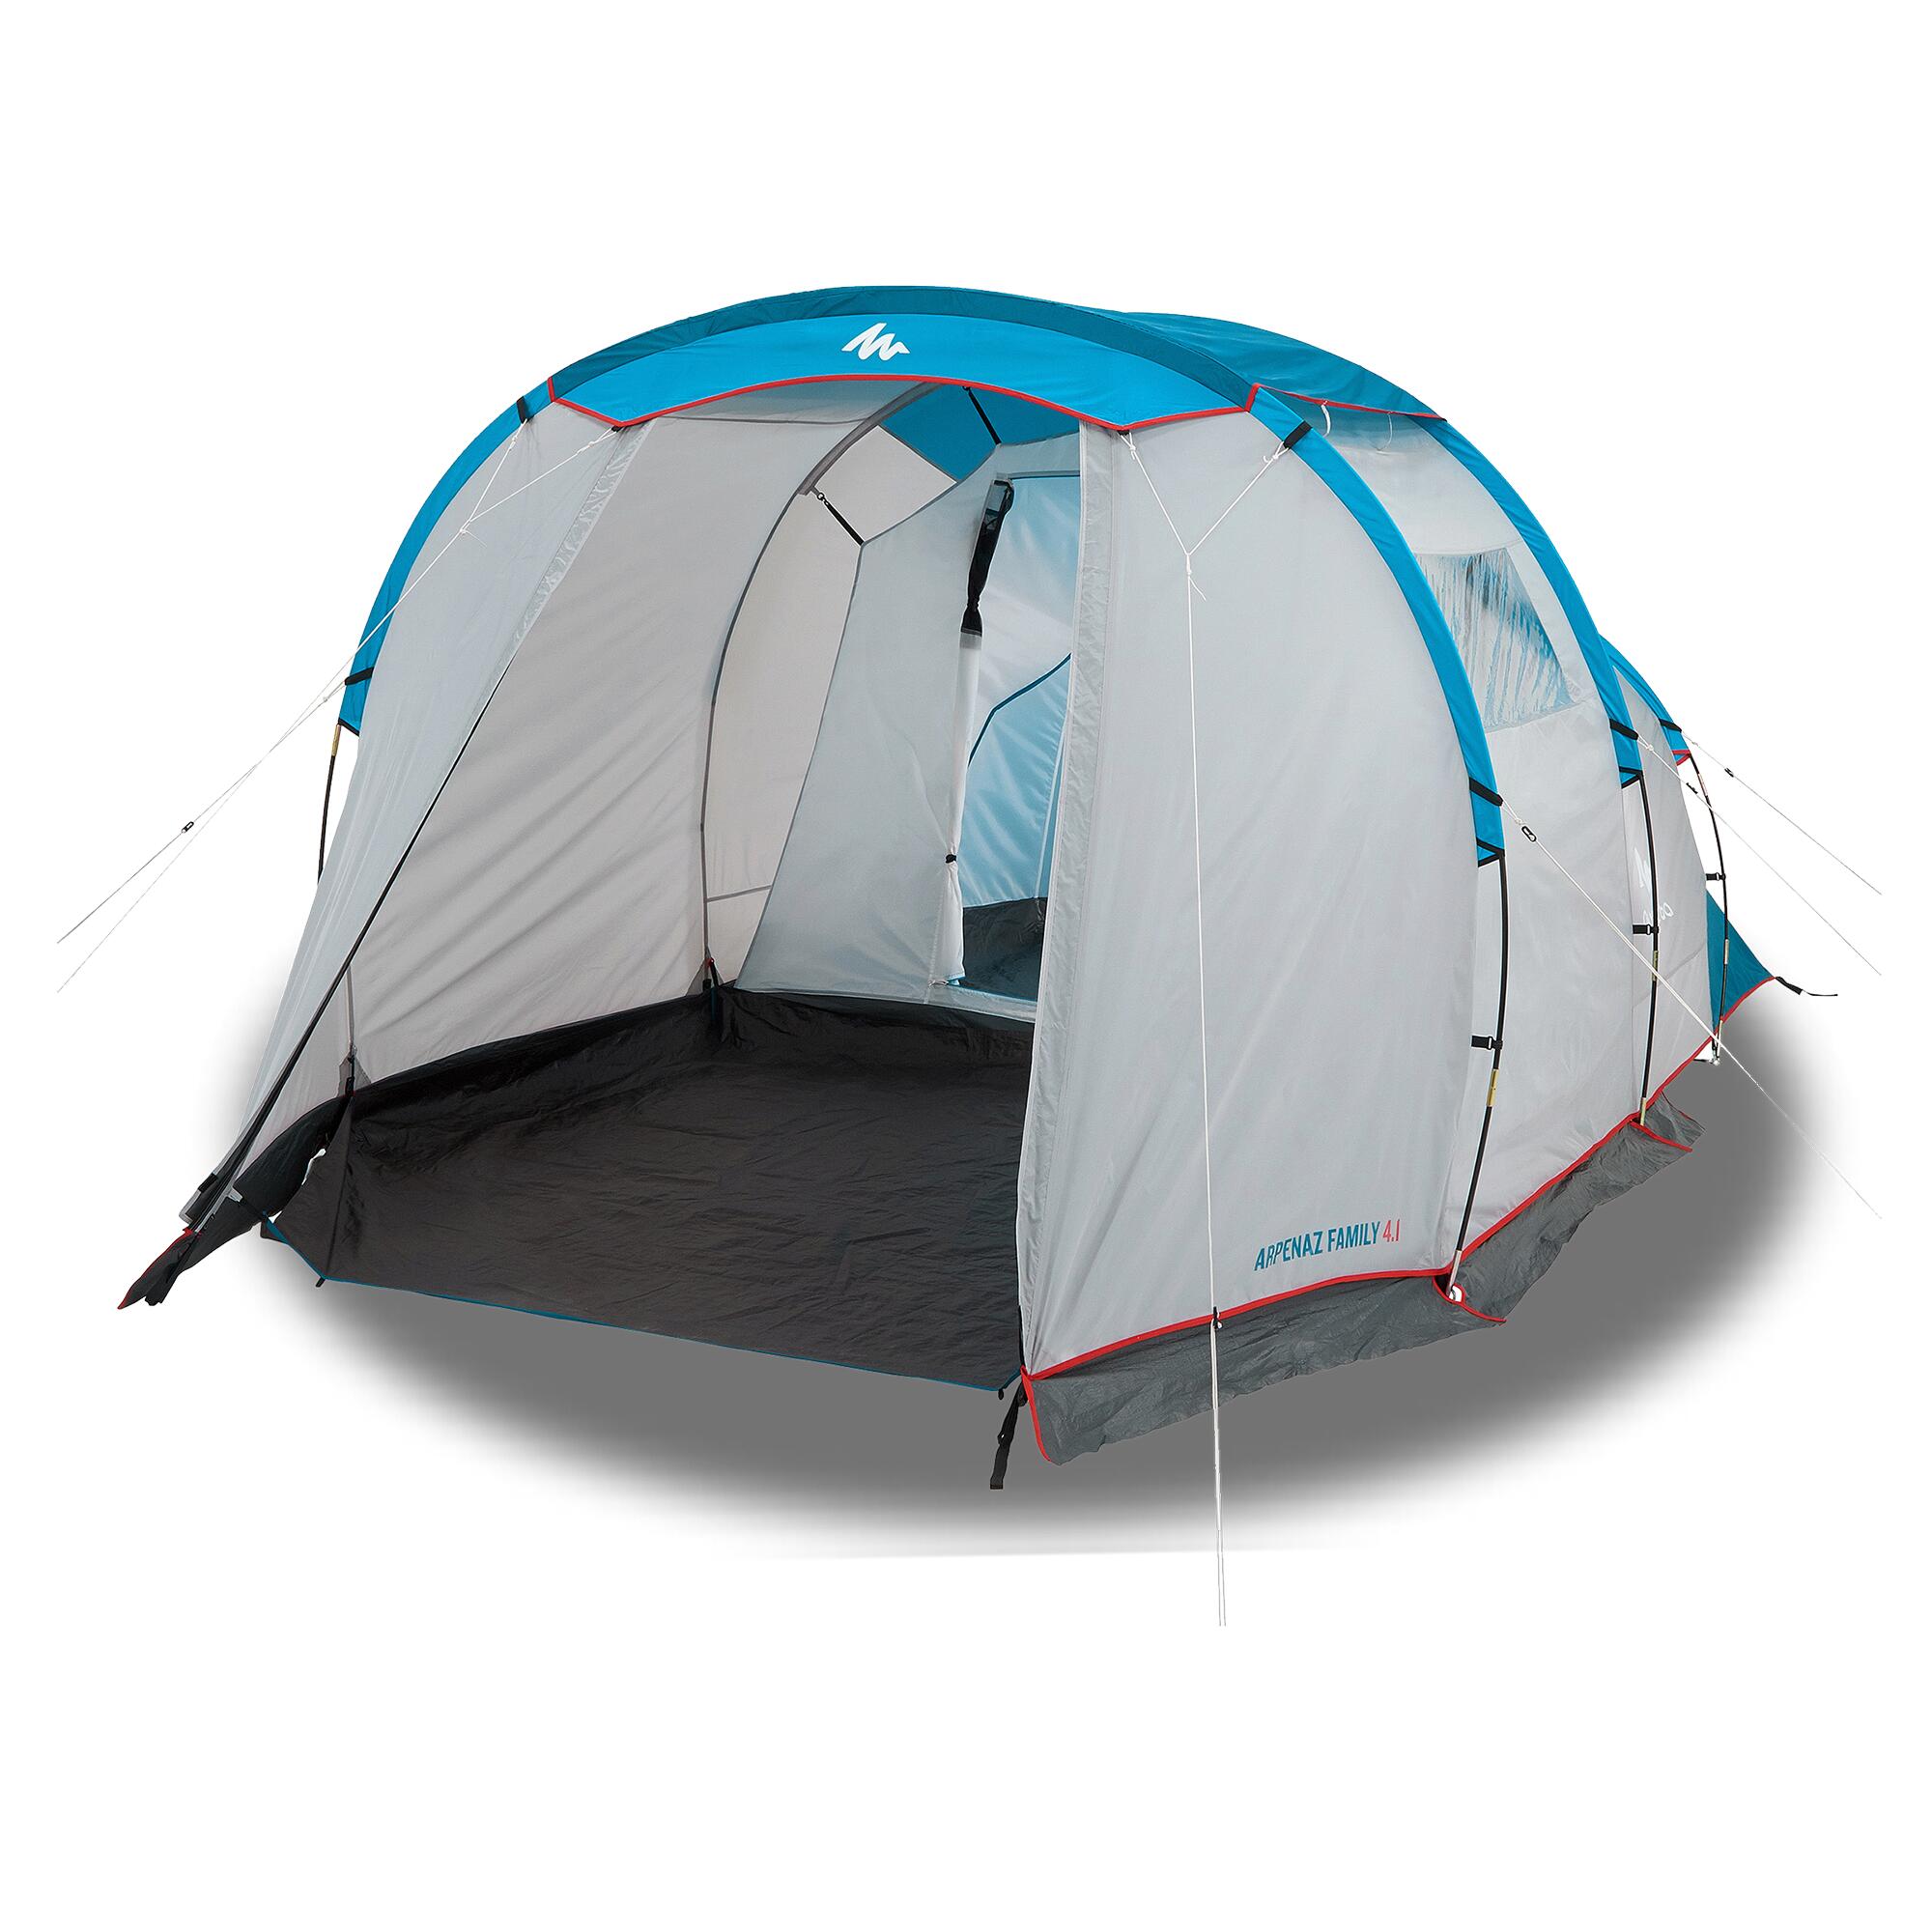 Quechua Camping Tent With Poles - Arpenaz 4.1 4 Person 1 Bedroom